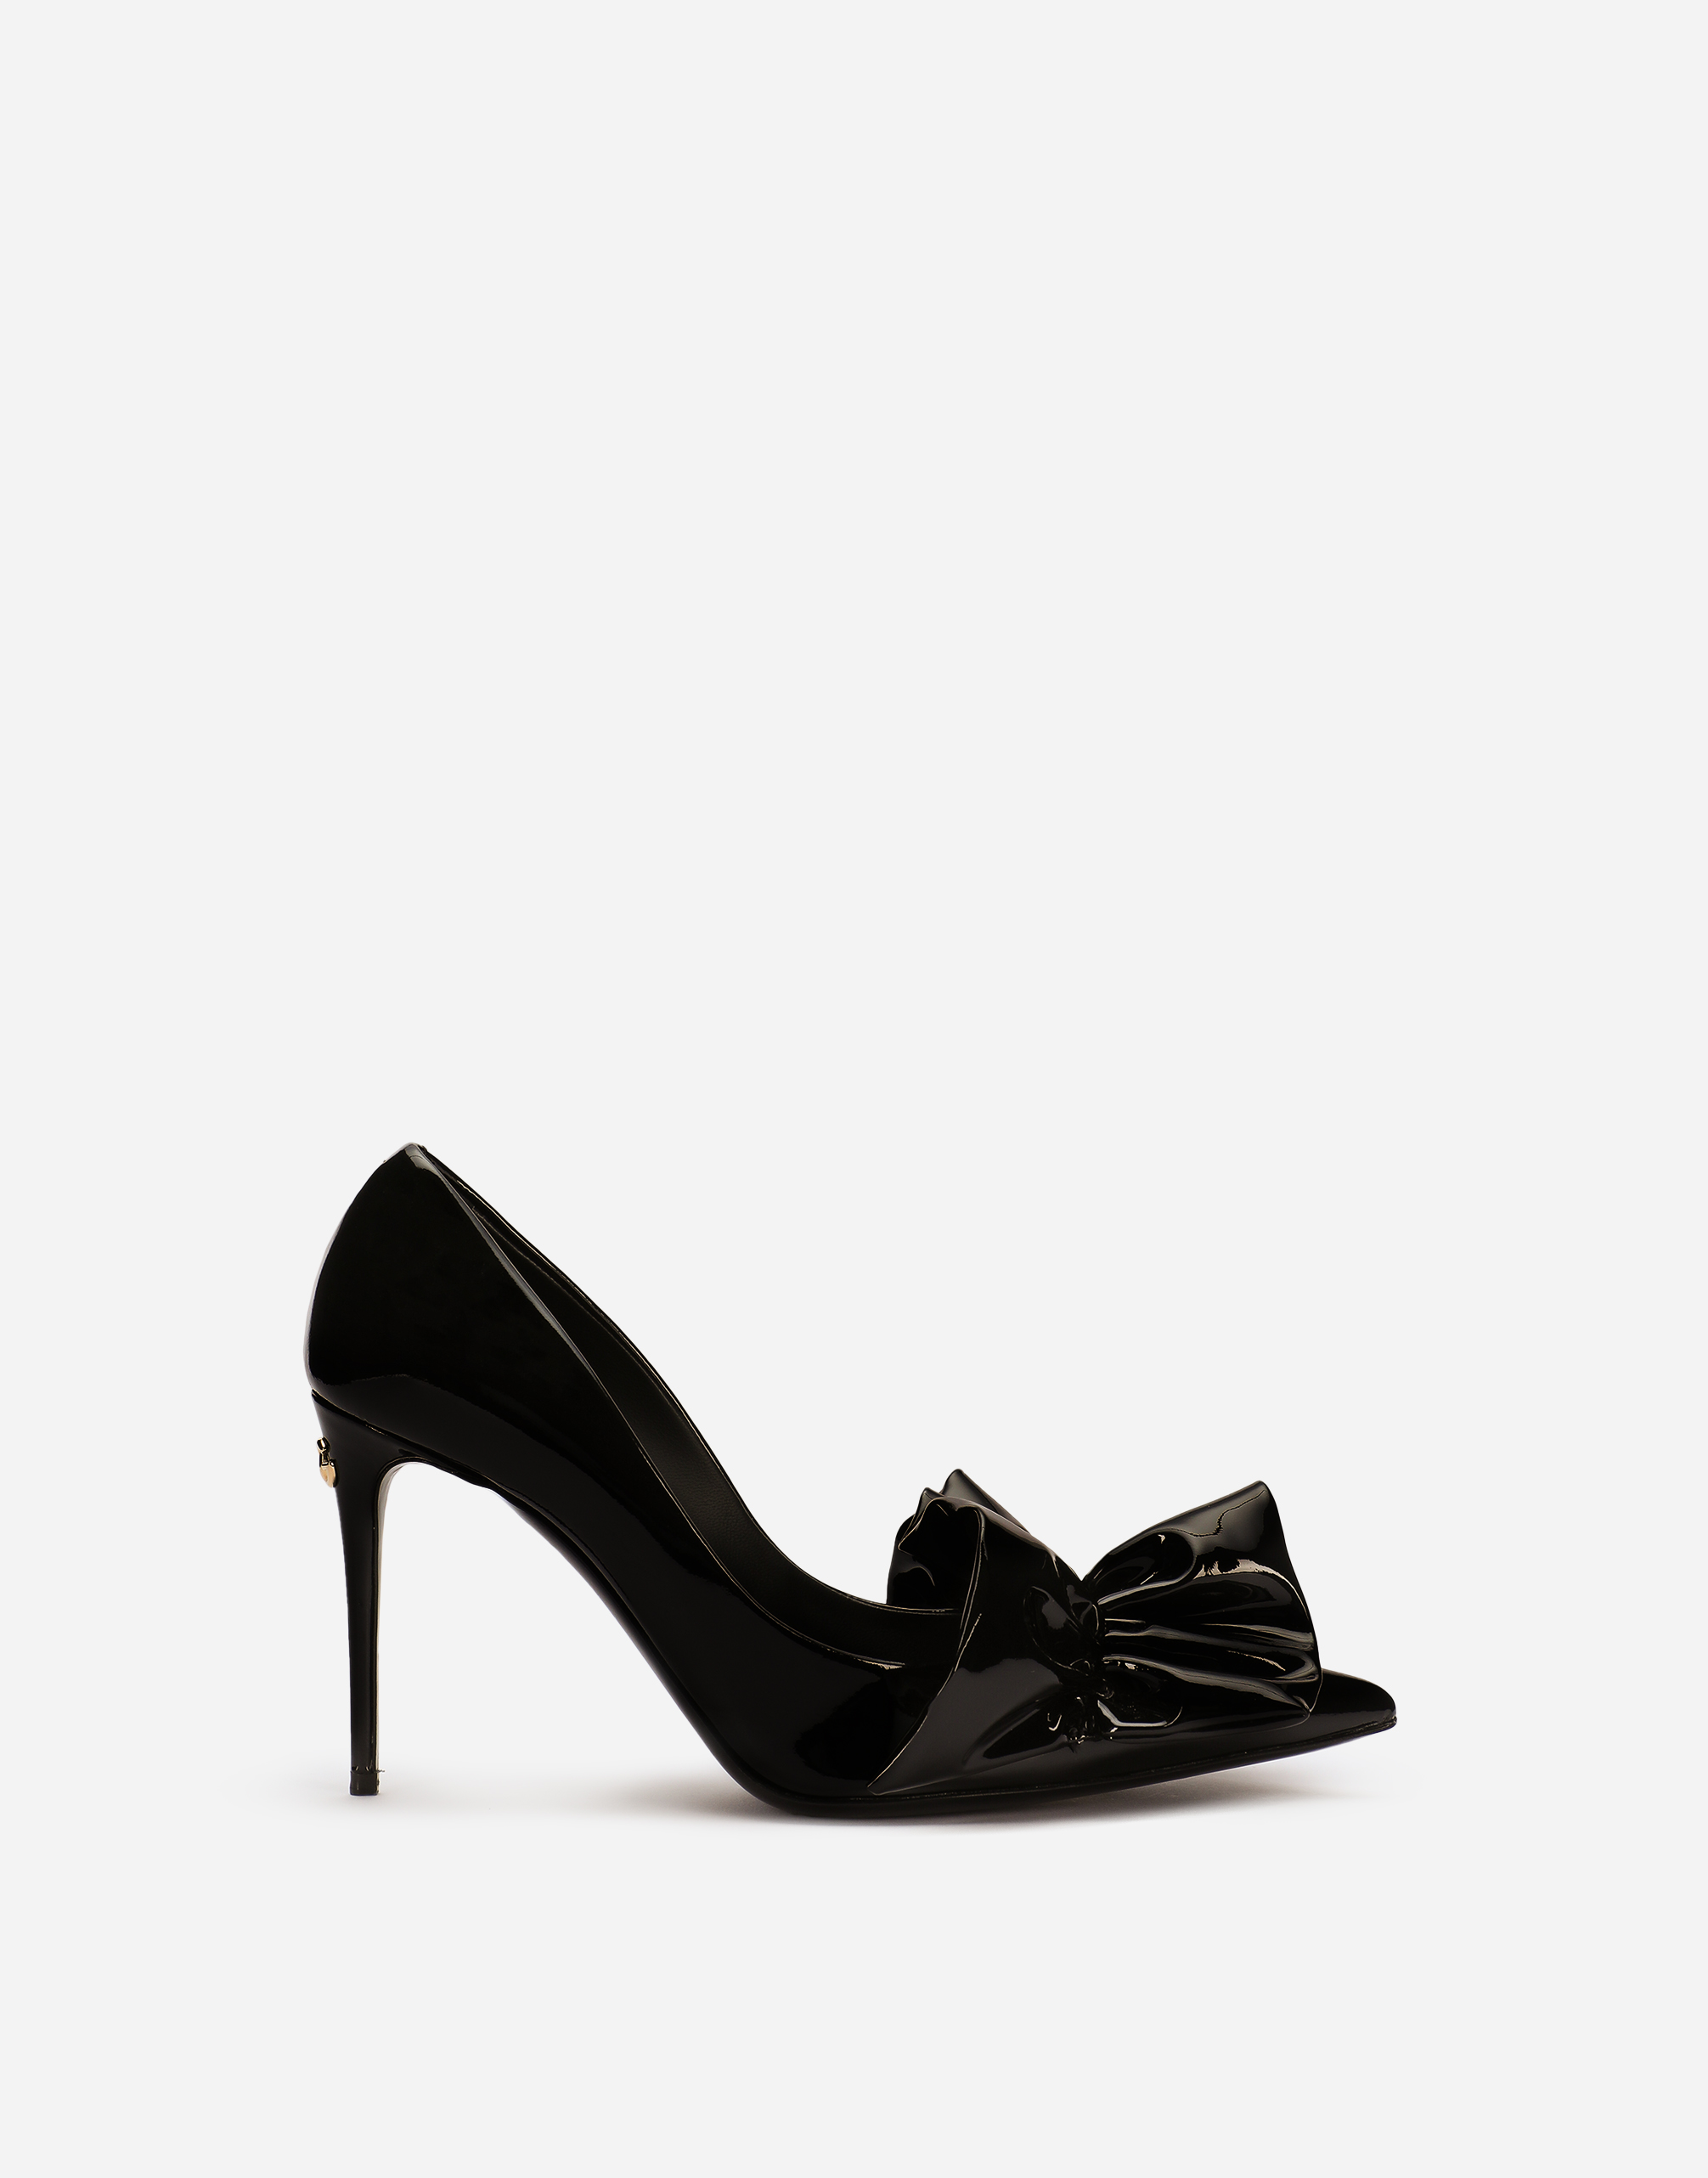 Patent leather pumps with ruches in Black